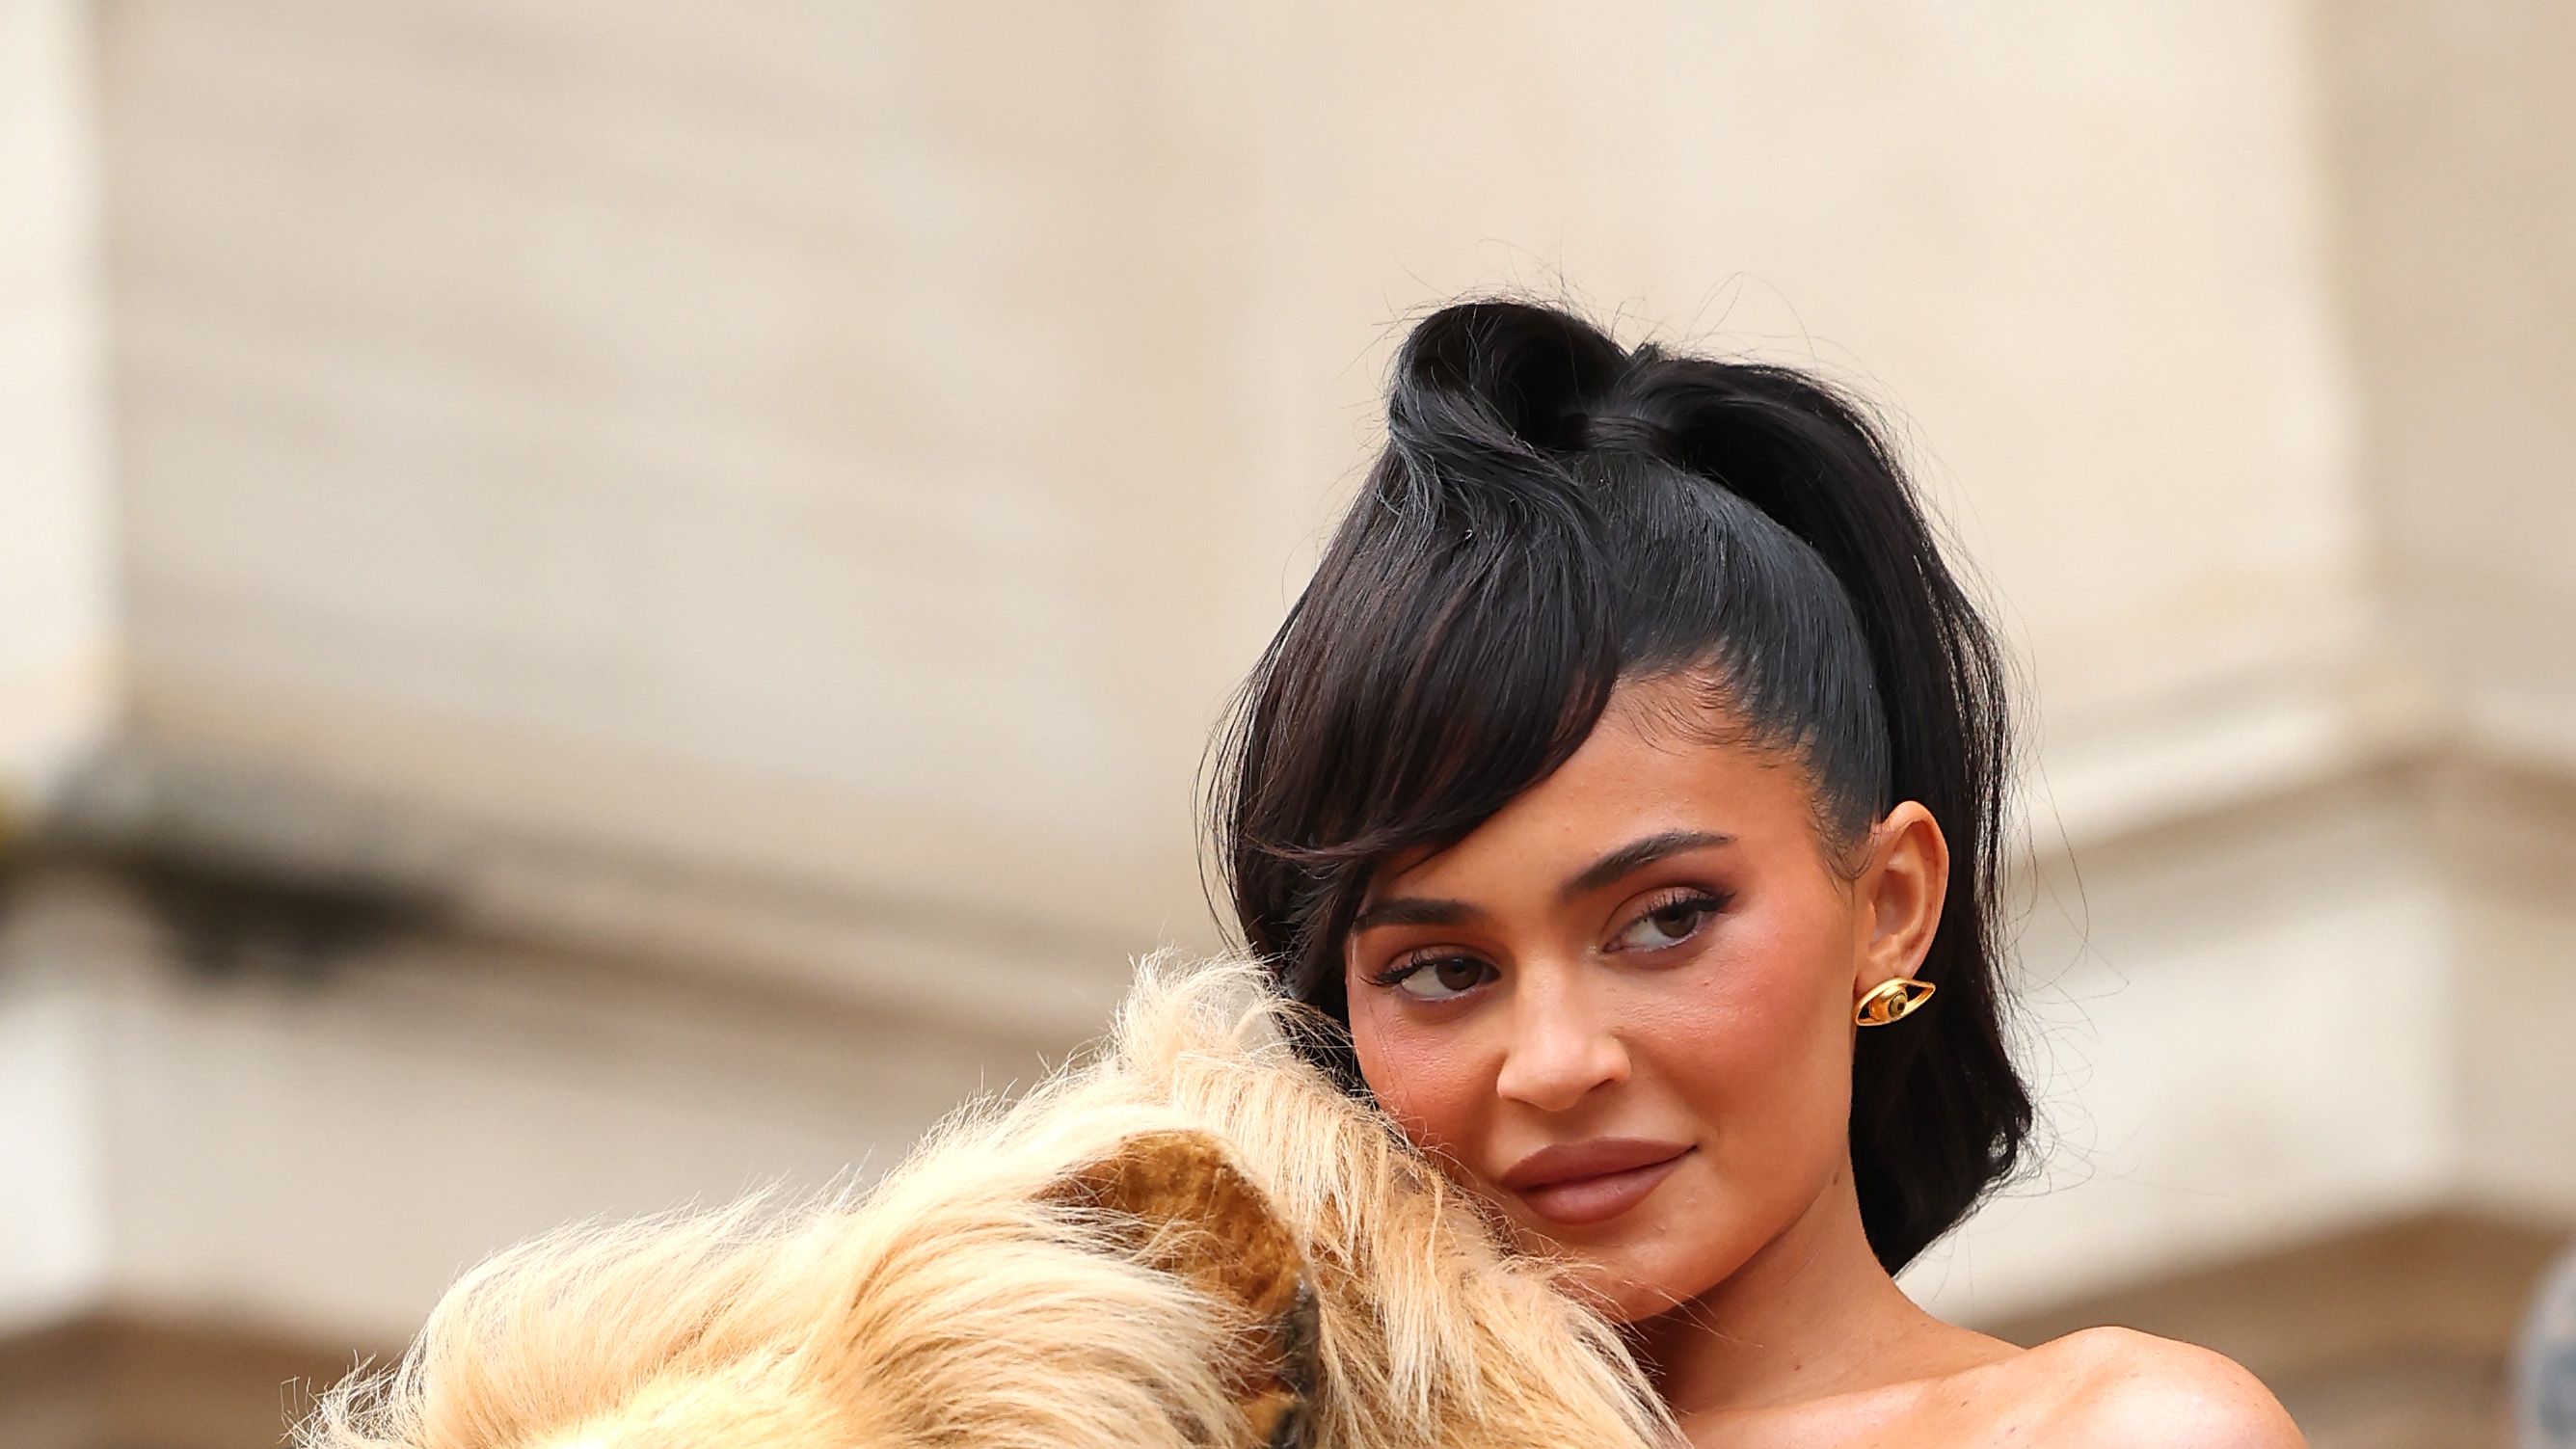 Kylie Jenner's Latest Paris Fashion Week Look Is The Definition Of